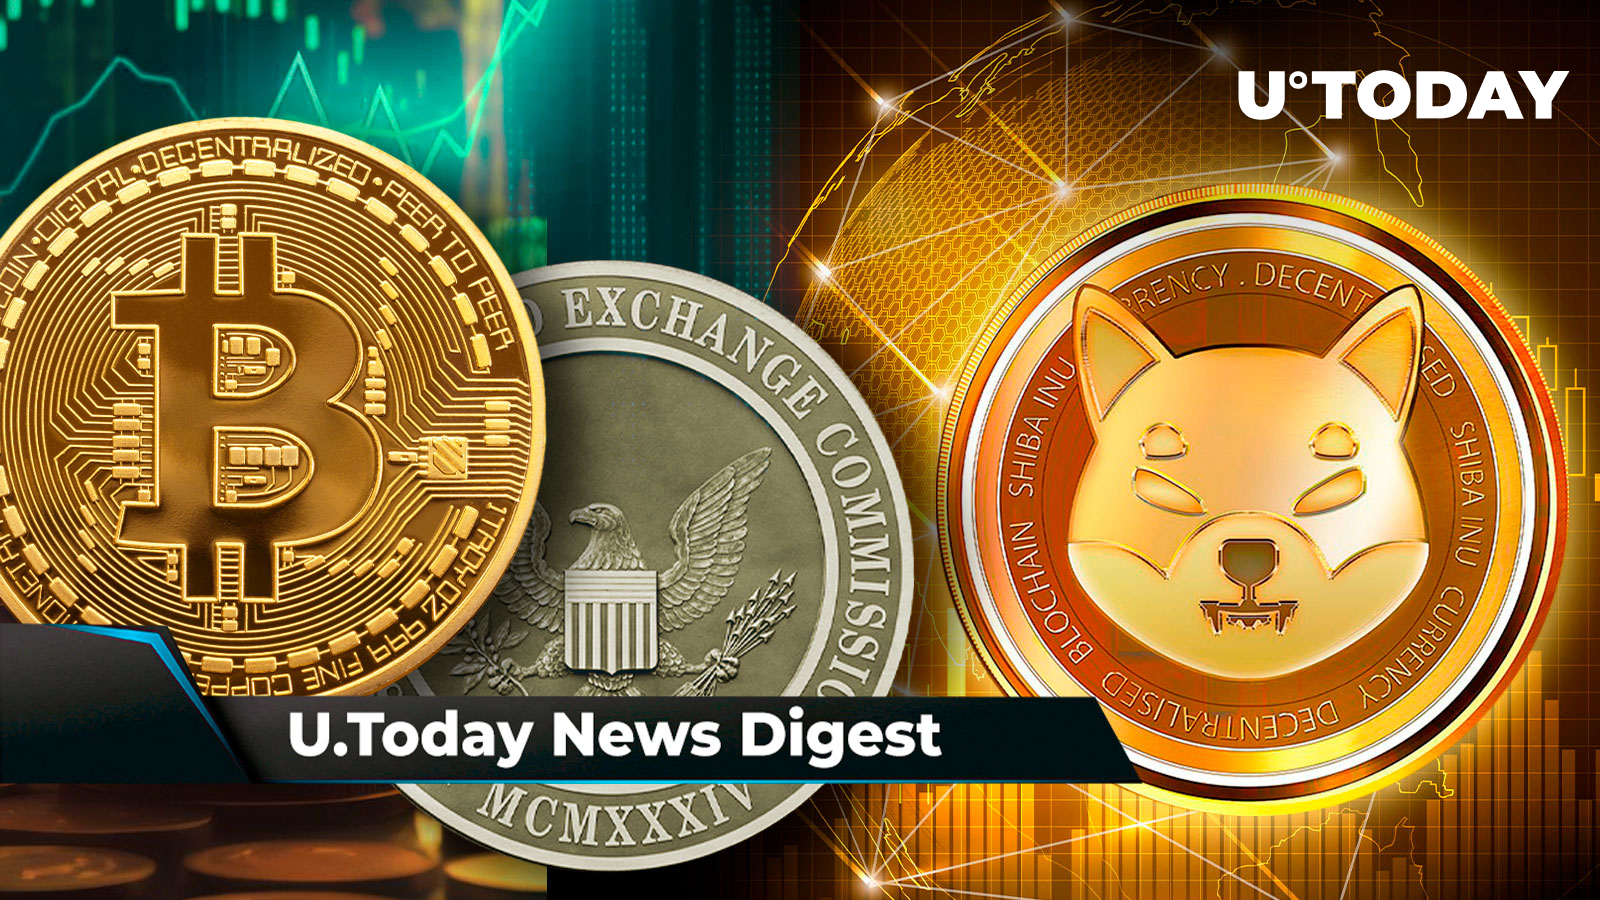 BTC Price Surges as Grayscale Wins Against SEC in ETF Case, Shibarium Gets Major Boost, Bitstamp Halts US Trading for SOL, MATIC, CHZ: Crypto News Digest by U.Today